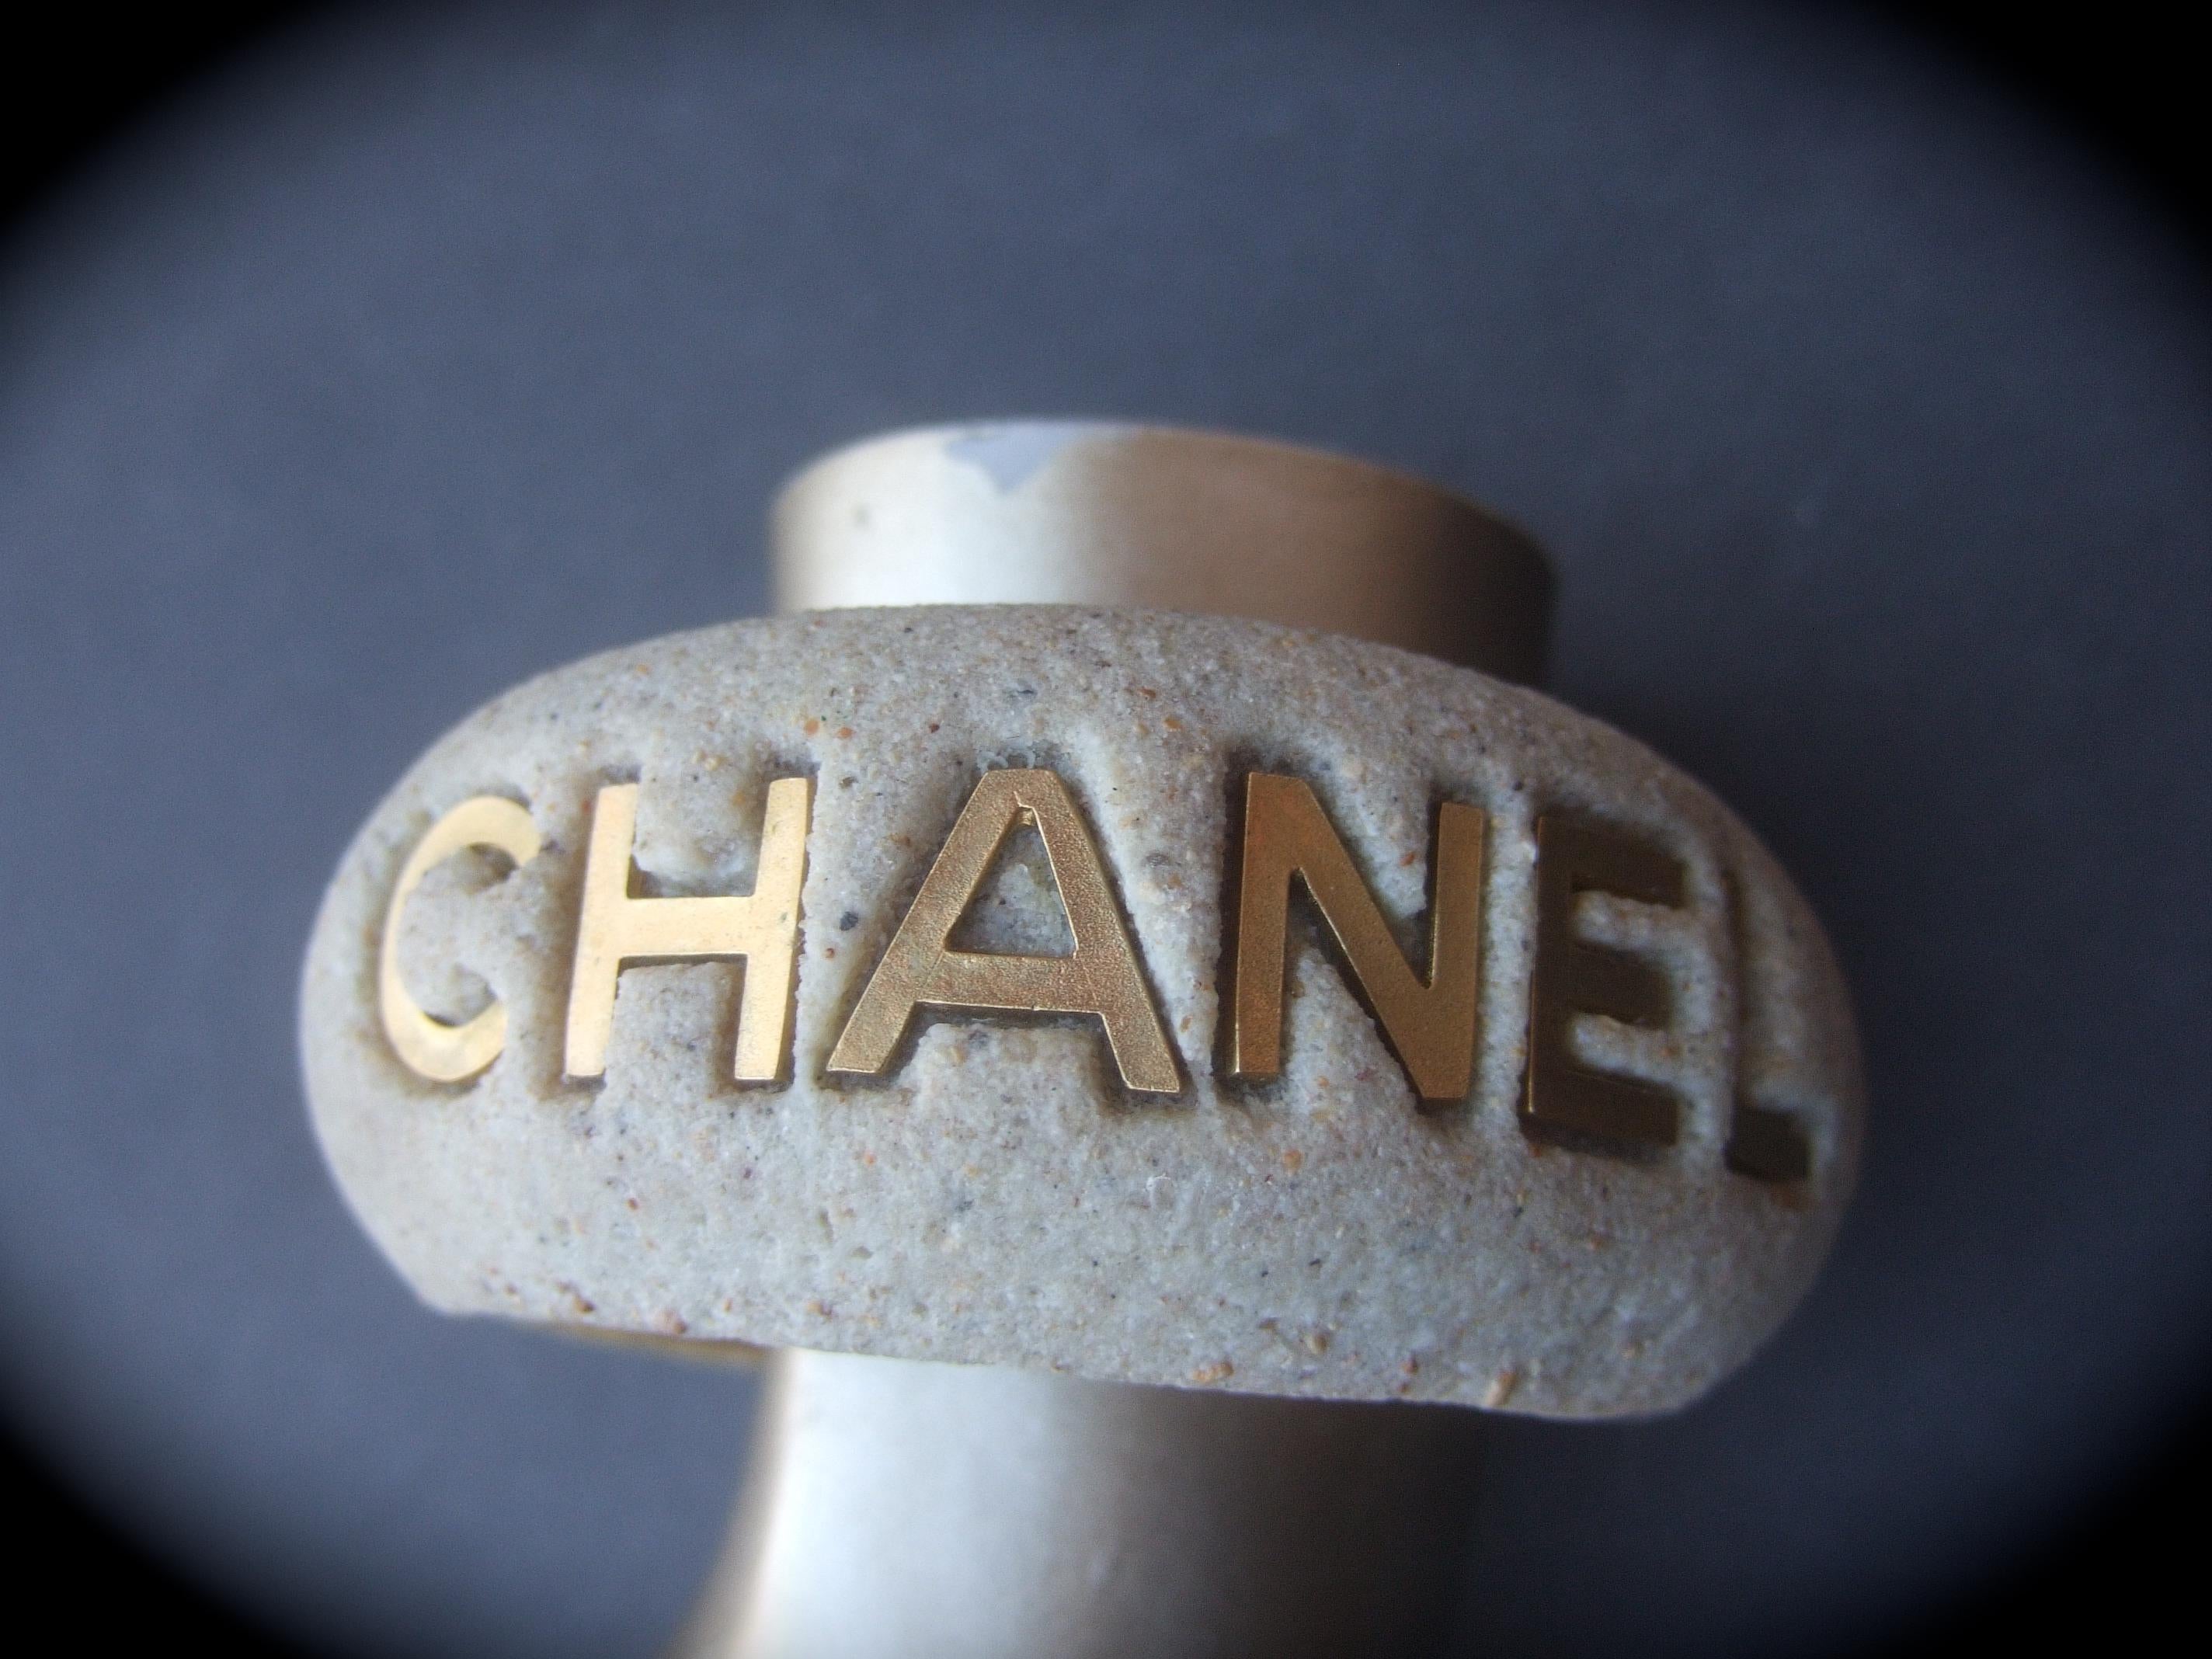 Chanel Wide Molded Bisque Stone Cuff Bracelet in Chanel Presentation Box c 1990s For Sale 6